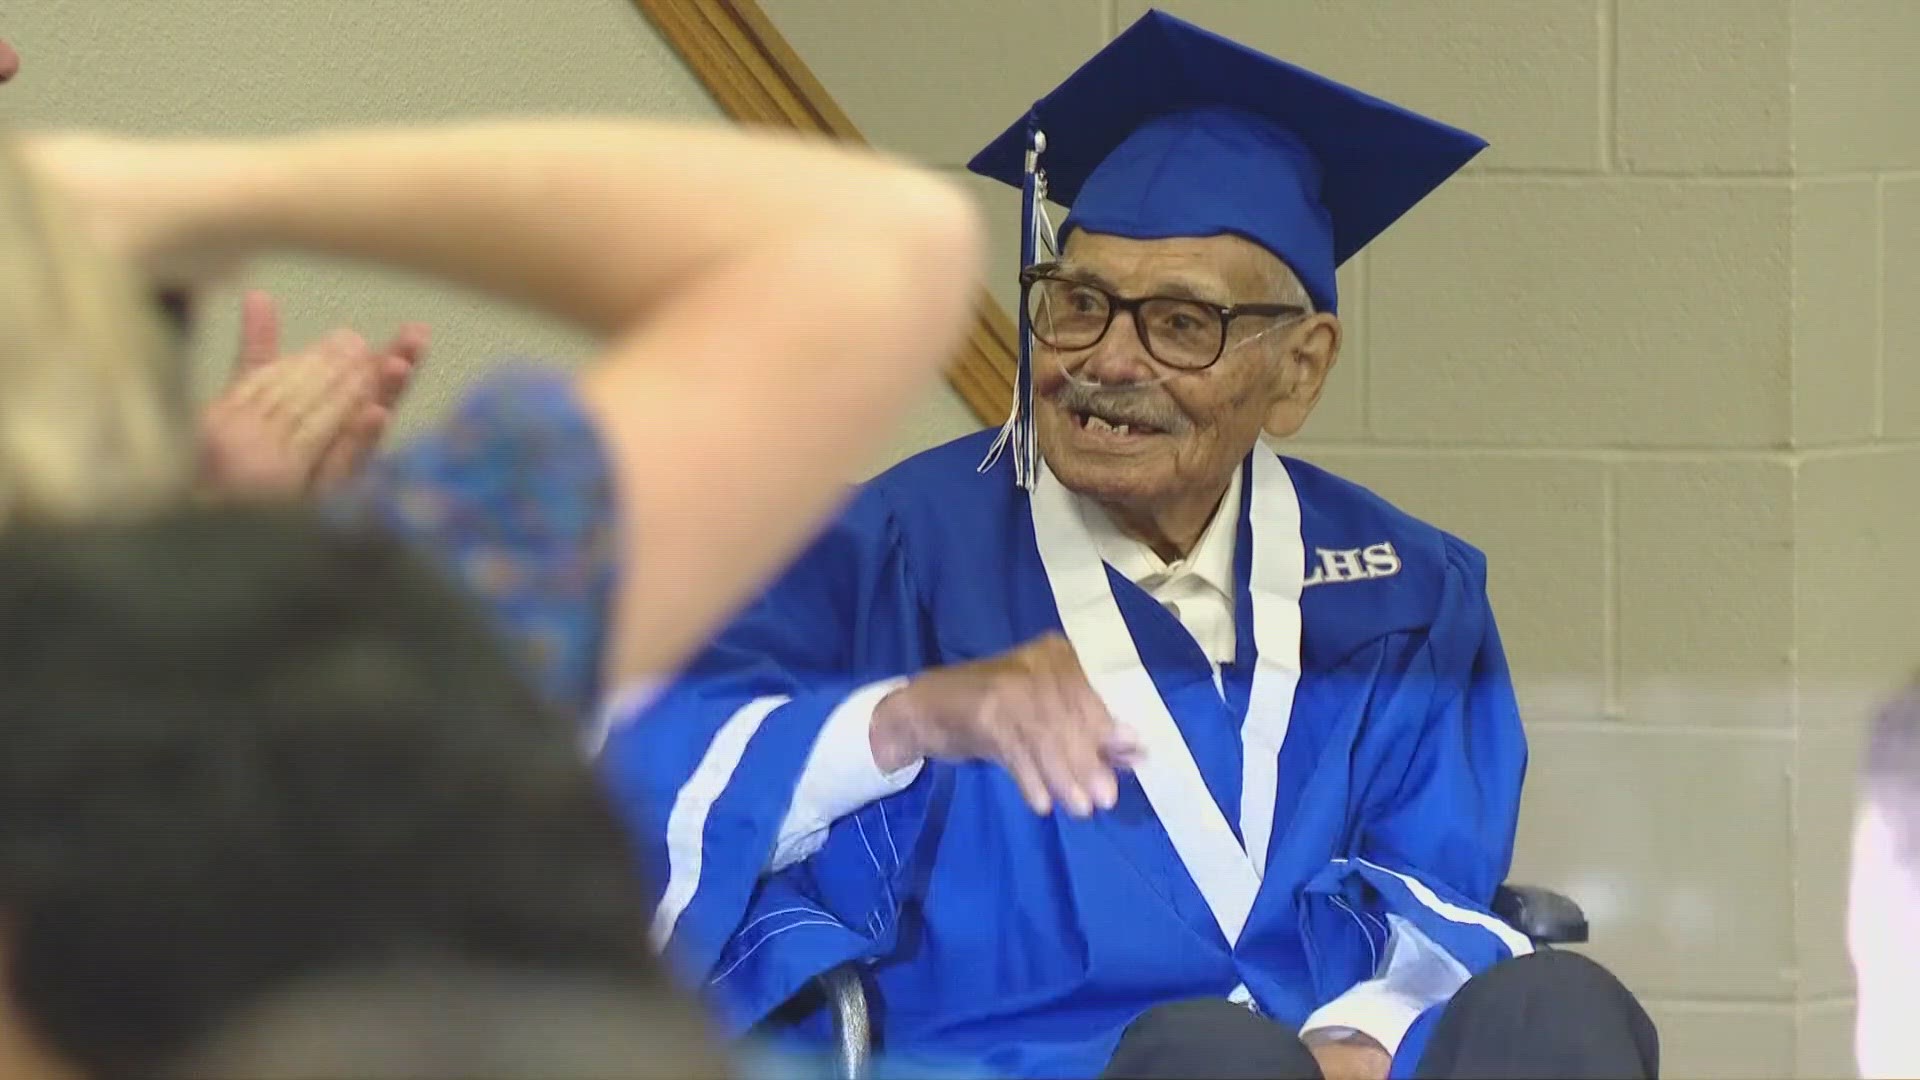 The 96-year-old received his diploma at Lampasas High School.